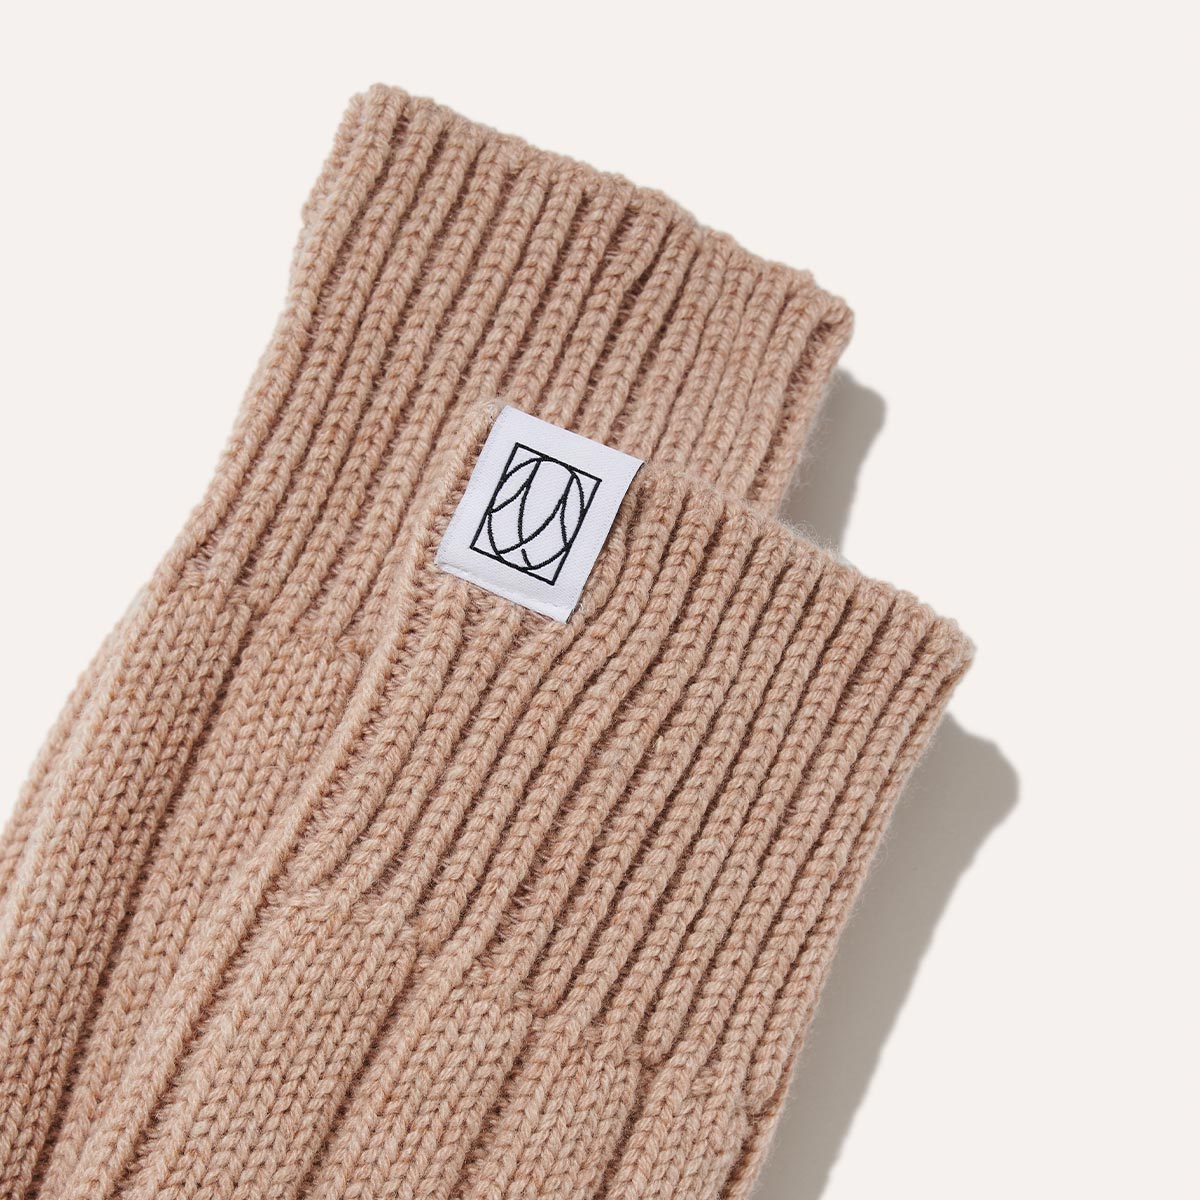 The Cozy Sock - Oatmeal Wool / Cashmere Blend